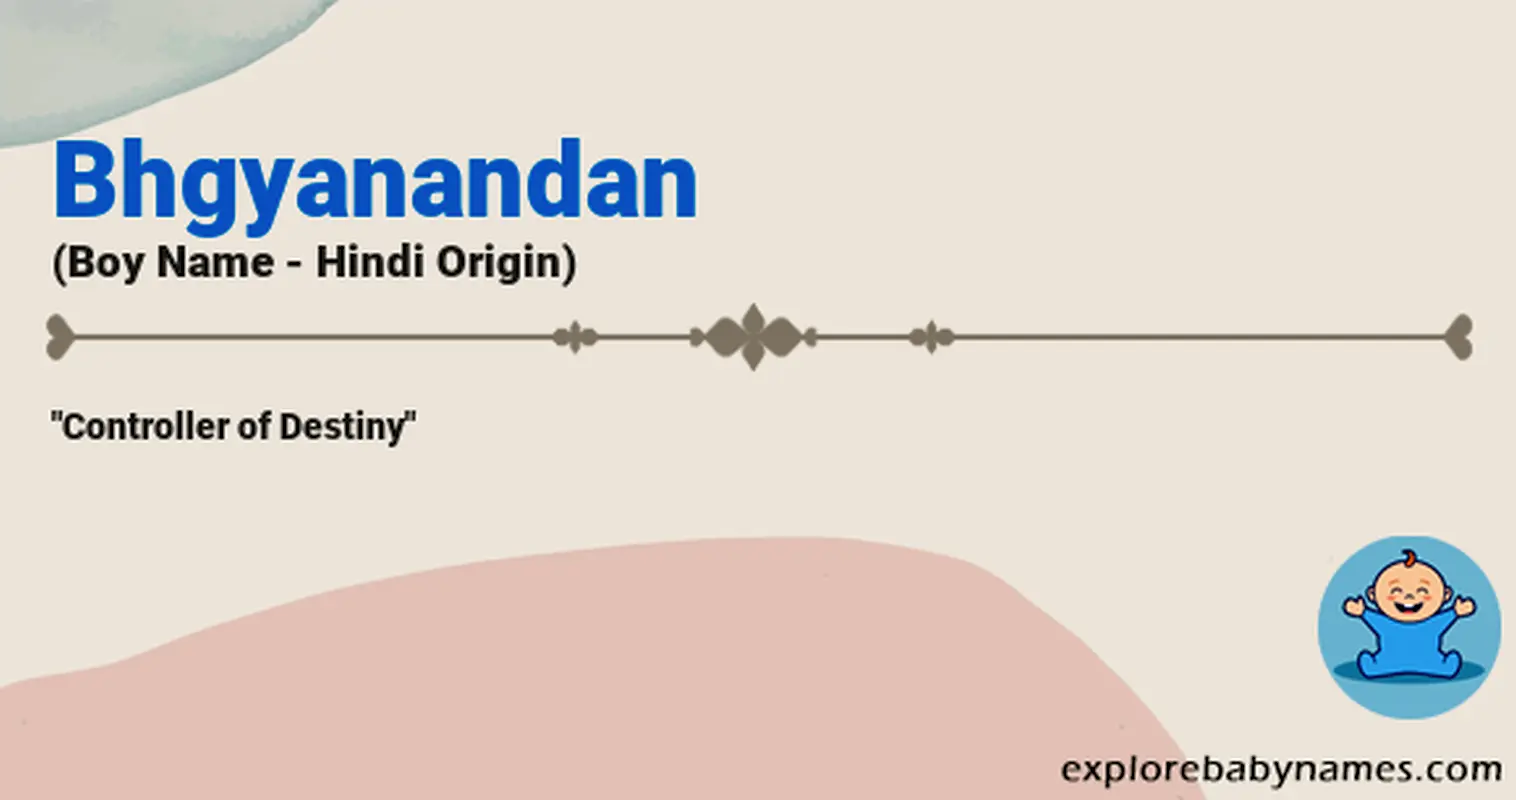 Meaning of Bhgyanandan